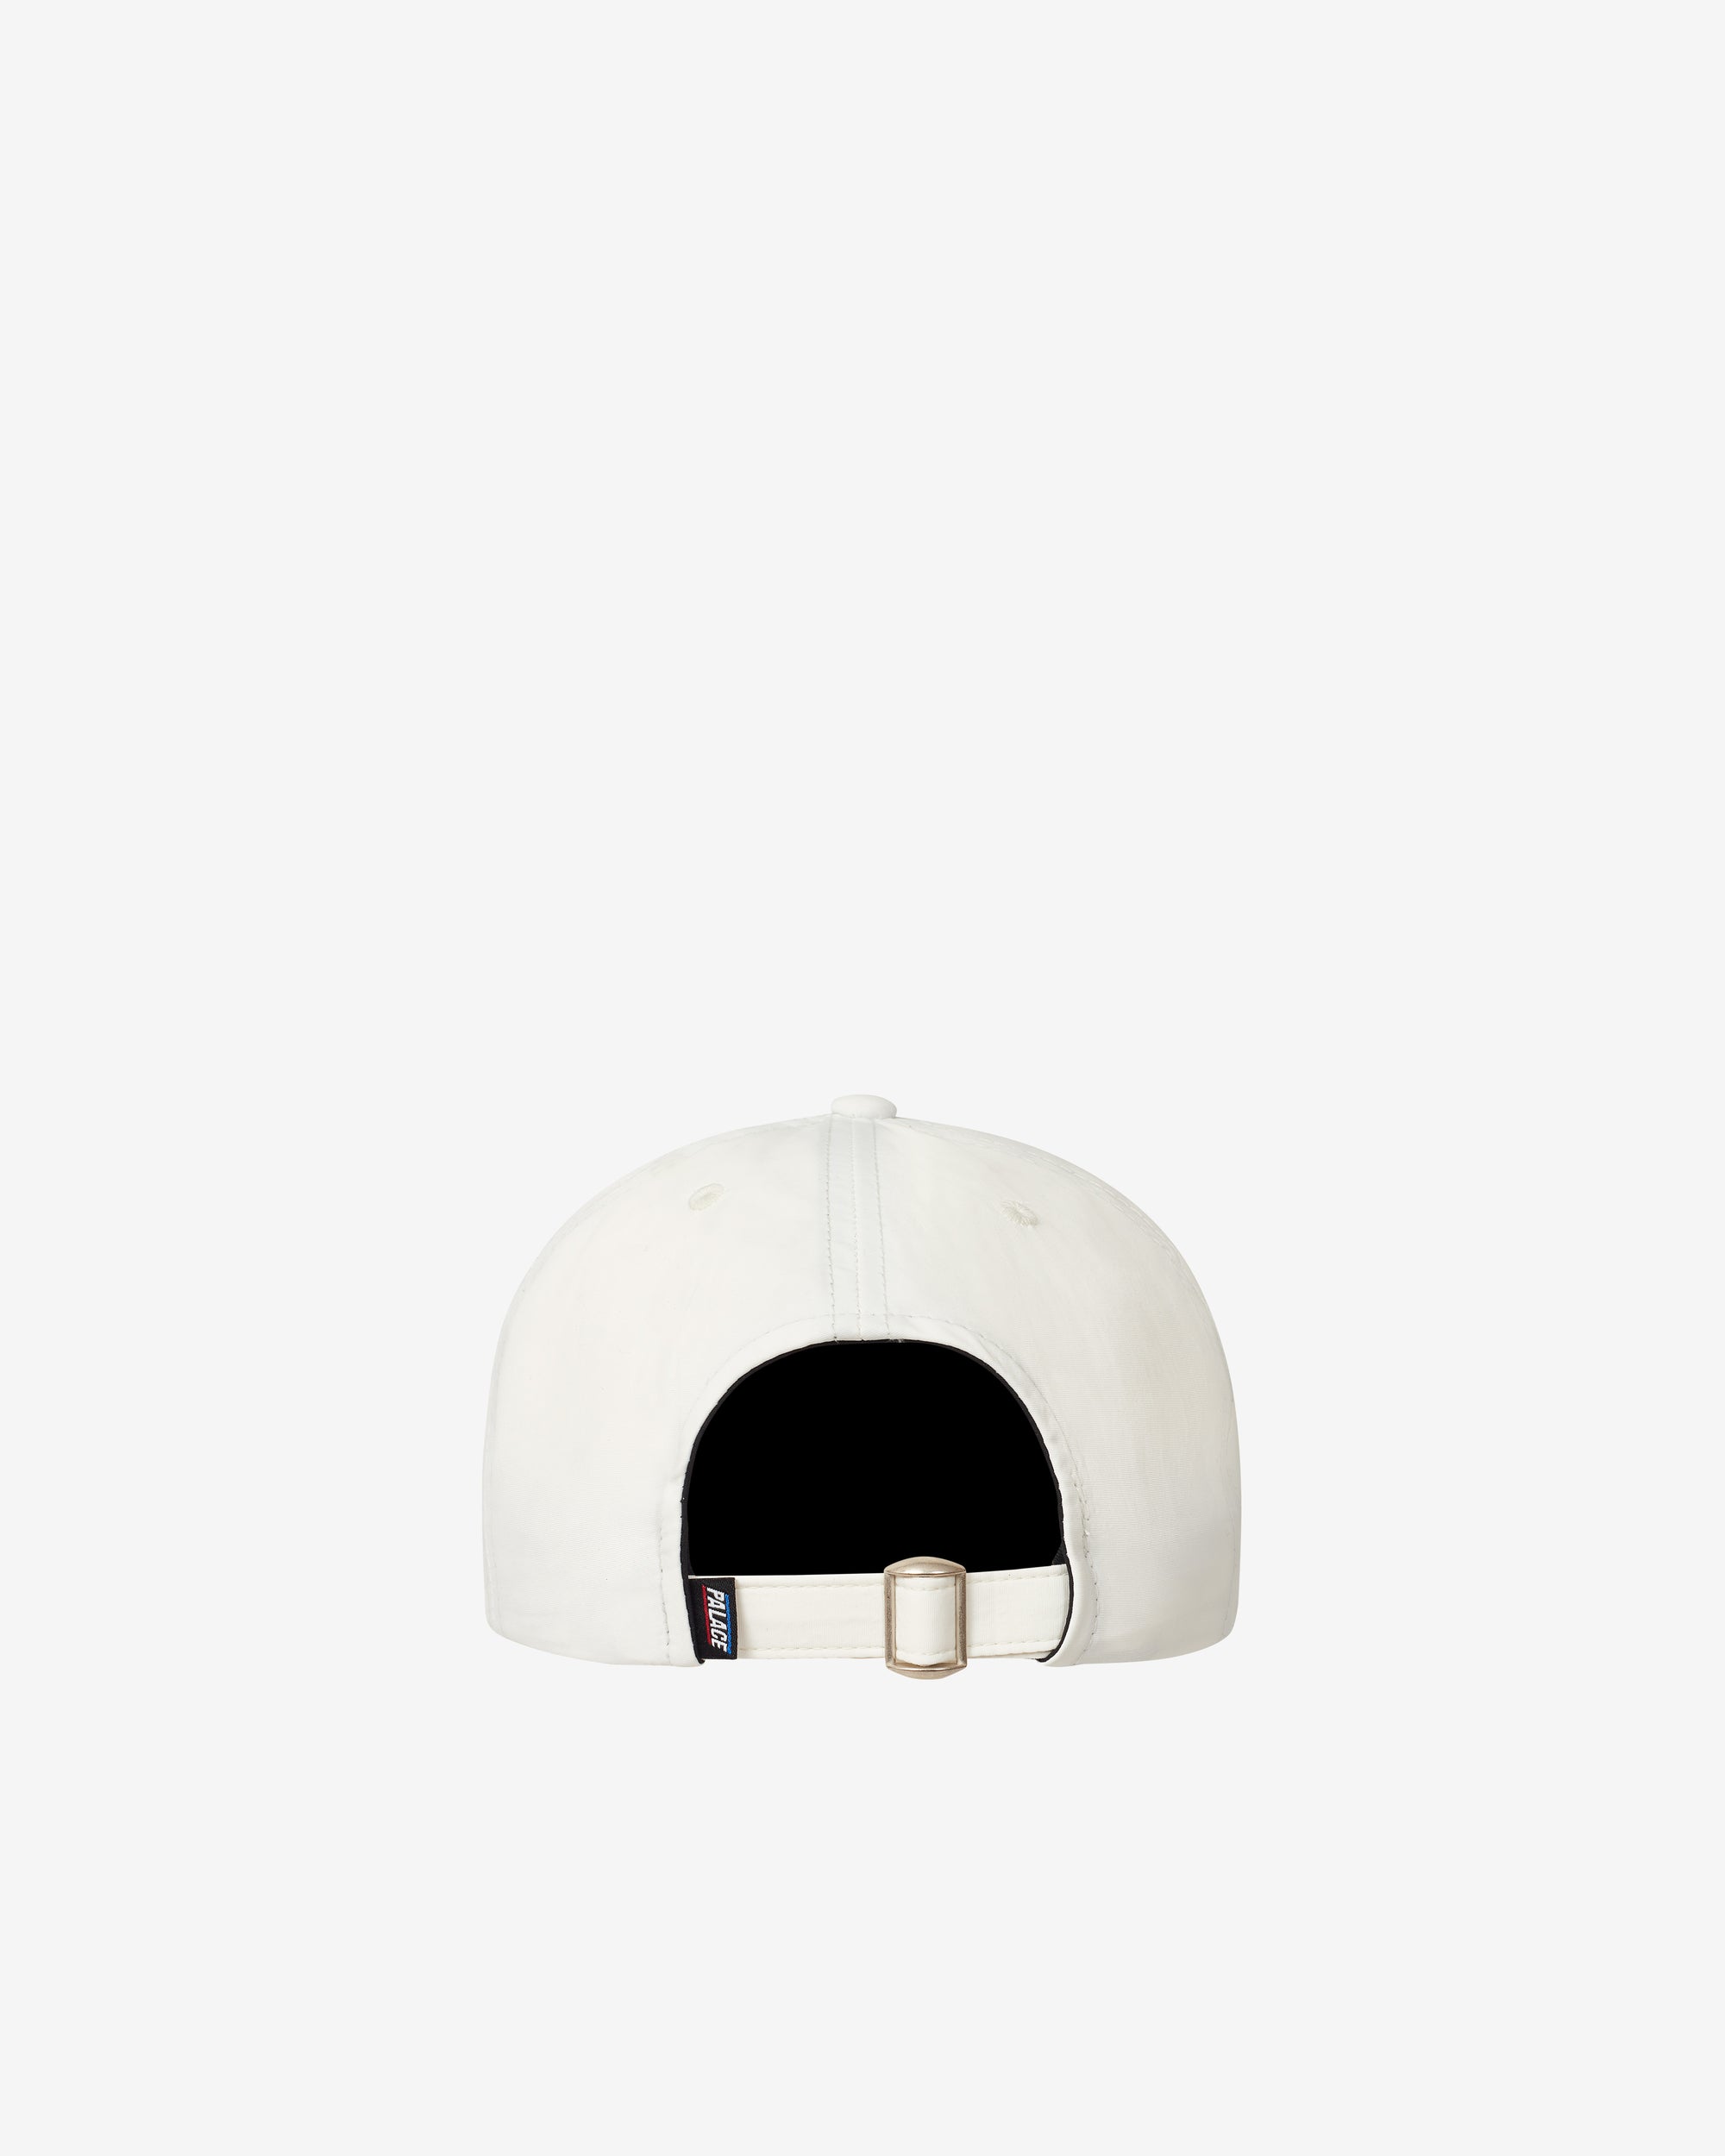 Palace - Men's Basically A Shell 6-Panel - (Soft White) view 3